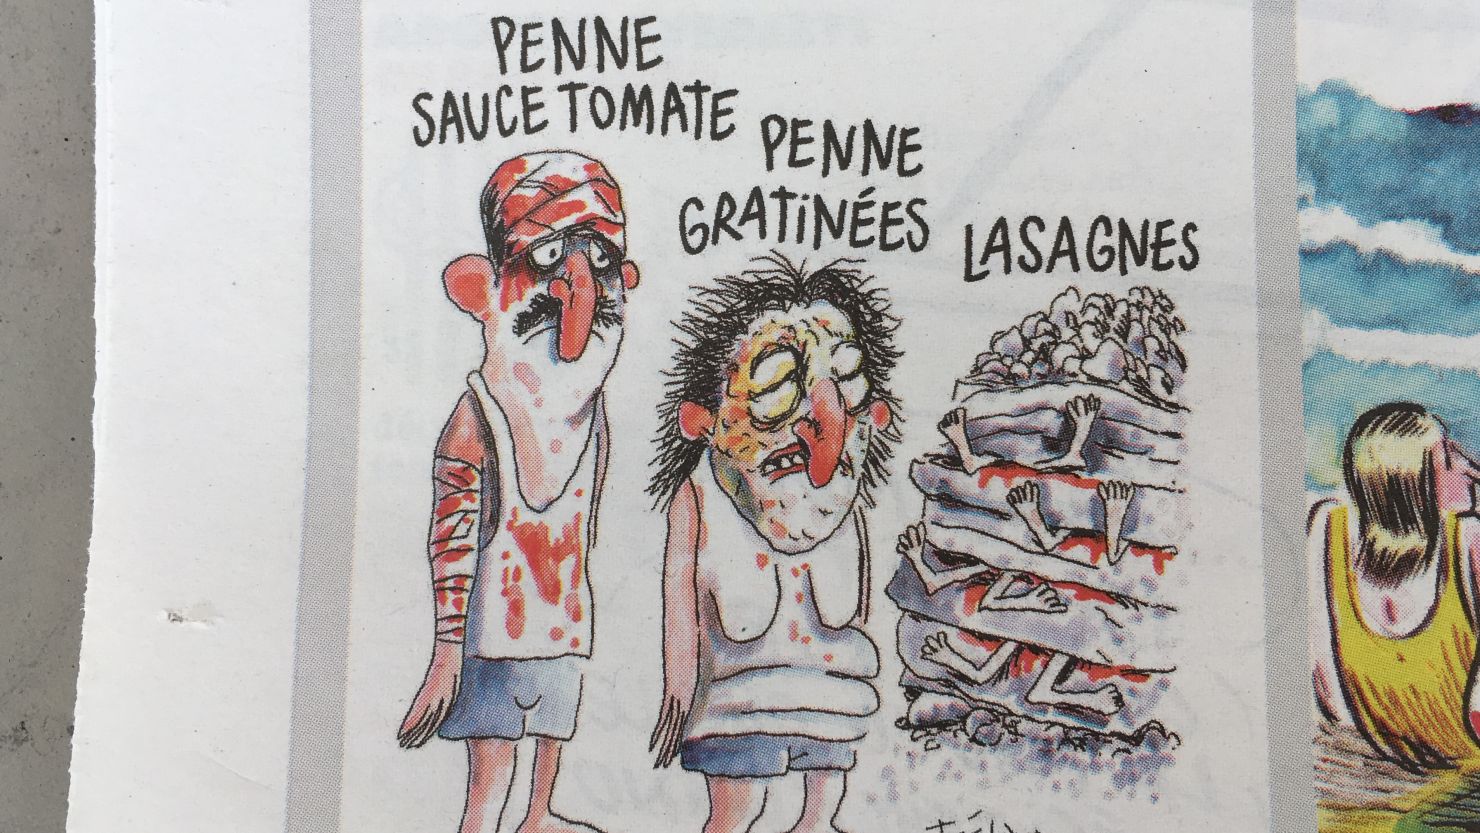 A controversial Charlie Hebdo cartoon on the deadly earthquake in Italy has sparked an angry response.